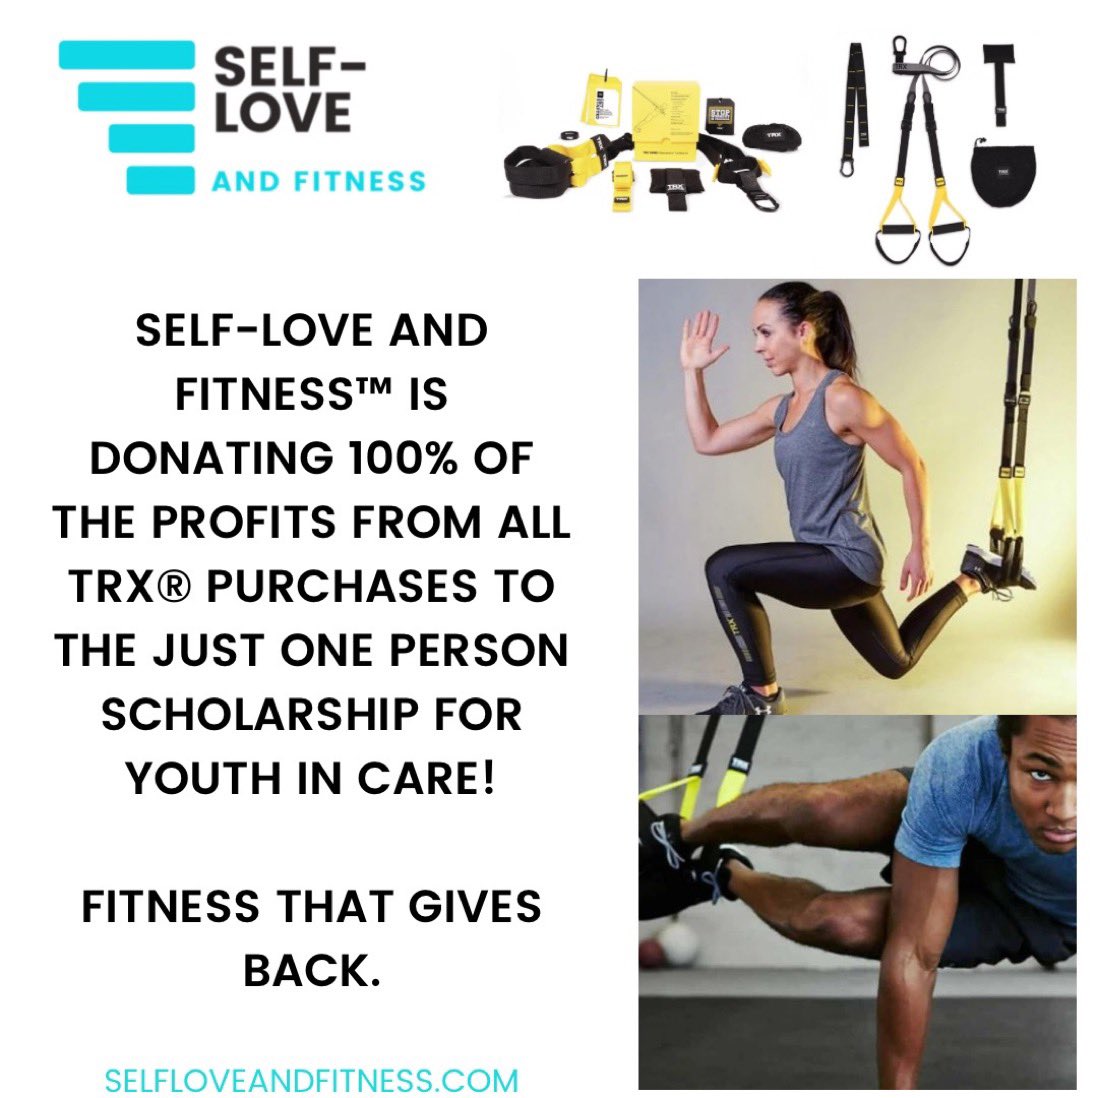 Where I am focusing my charity efforts, I think one in total is good. ✅ We are excited to announce that the profits from our TRX sales are going to the Just One Person Scholarship! #fostercareawareness #gymmotivation #ecommerce #startup #givingback